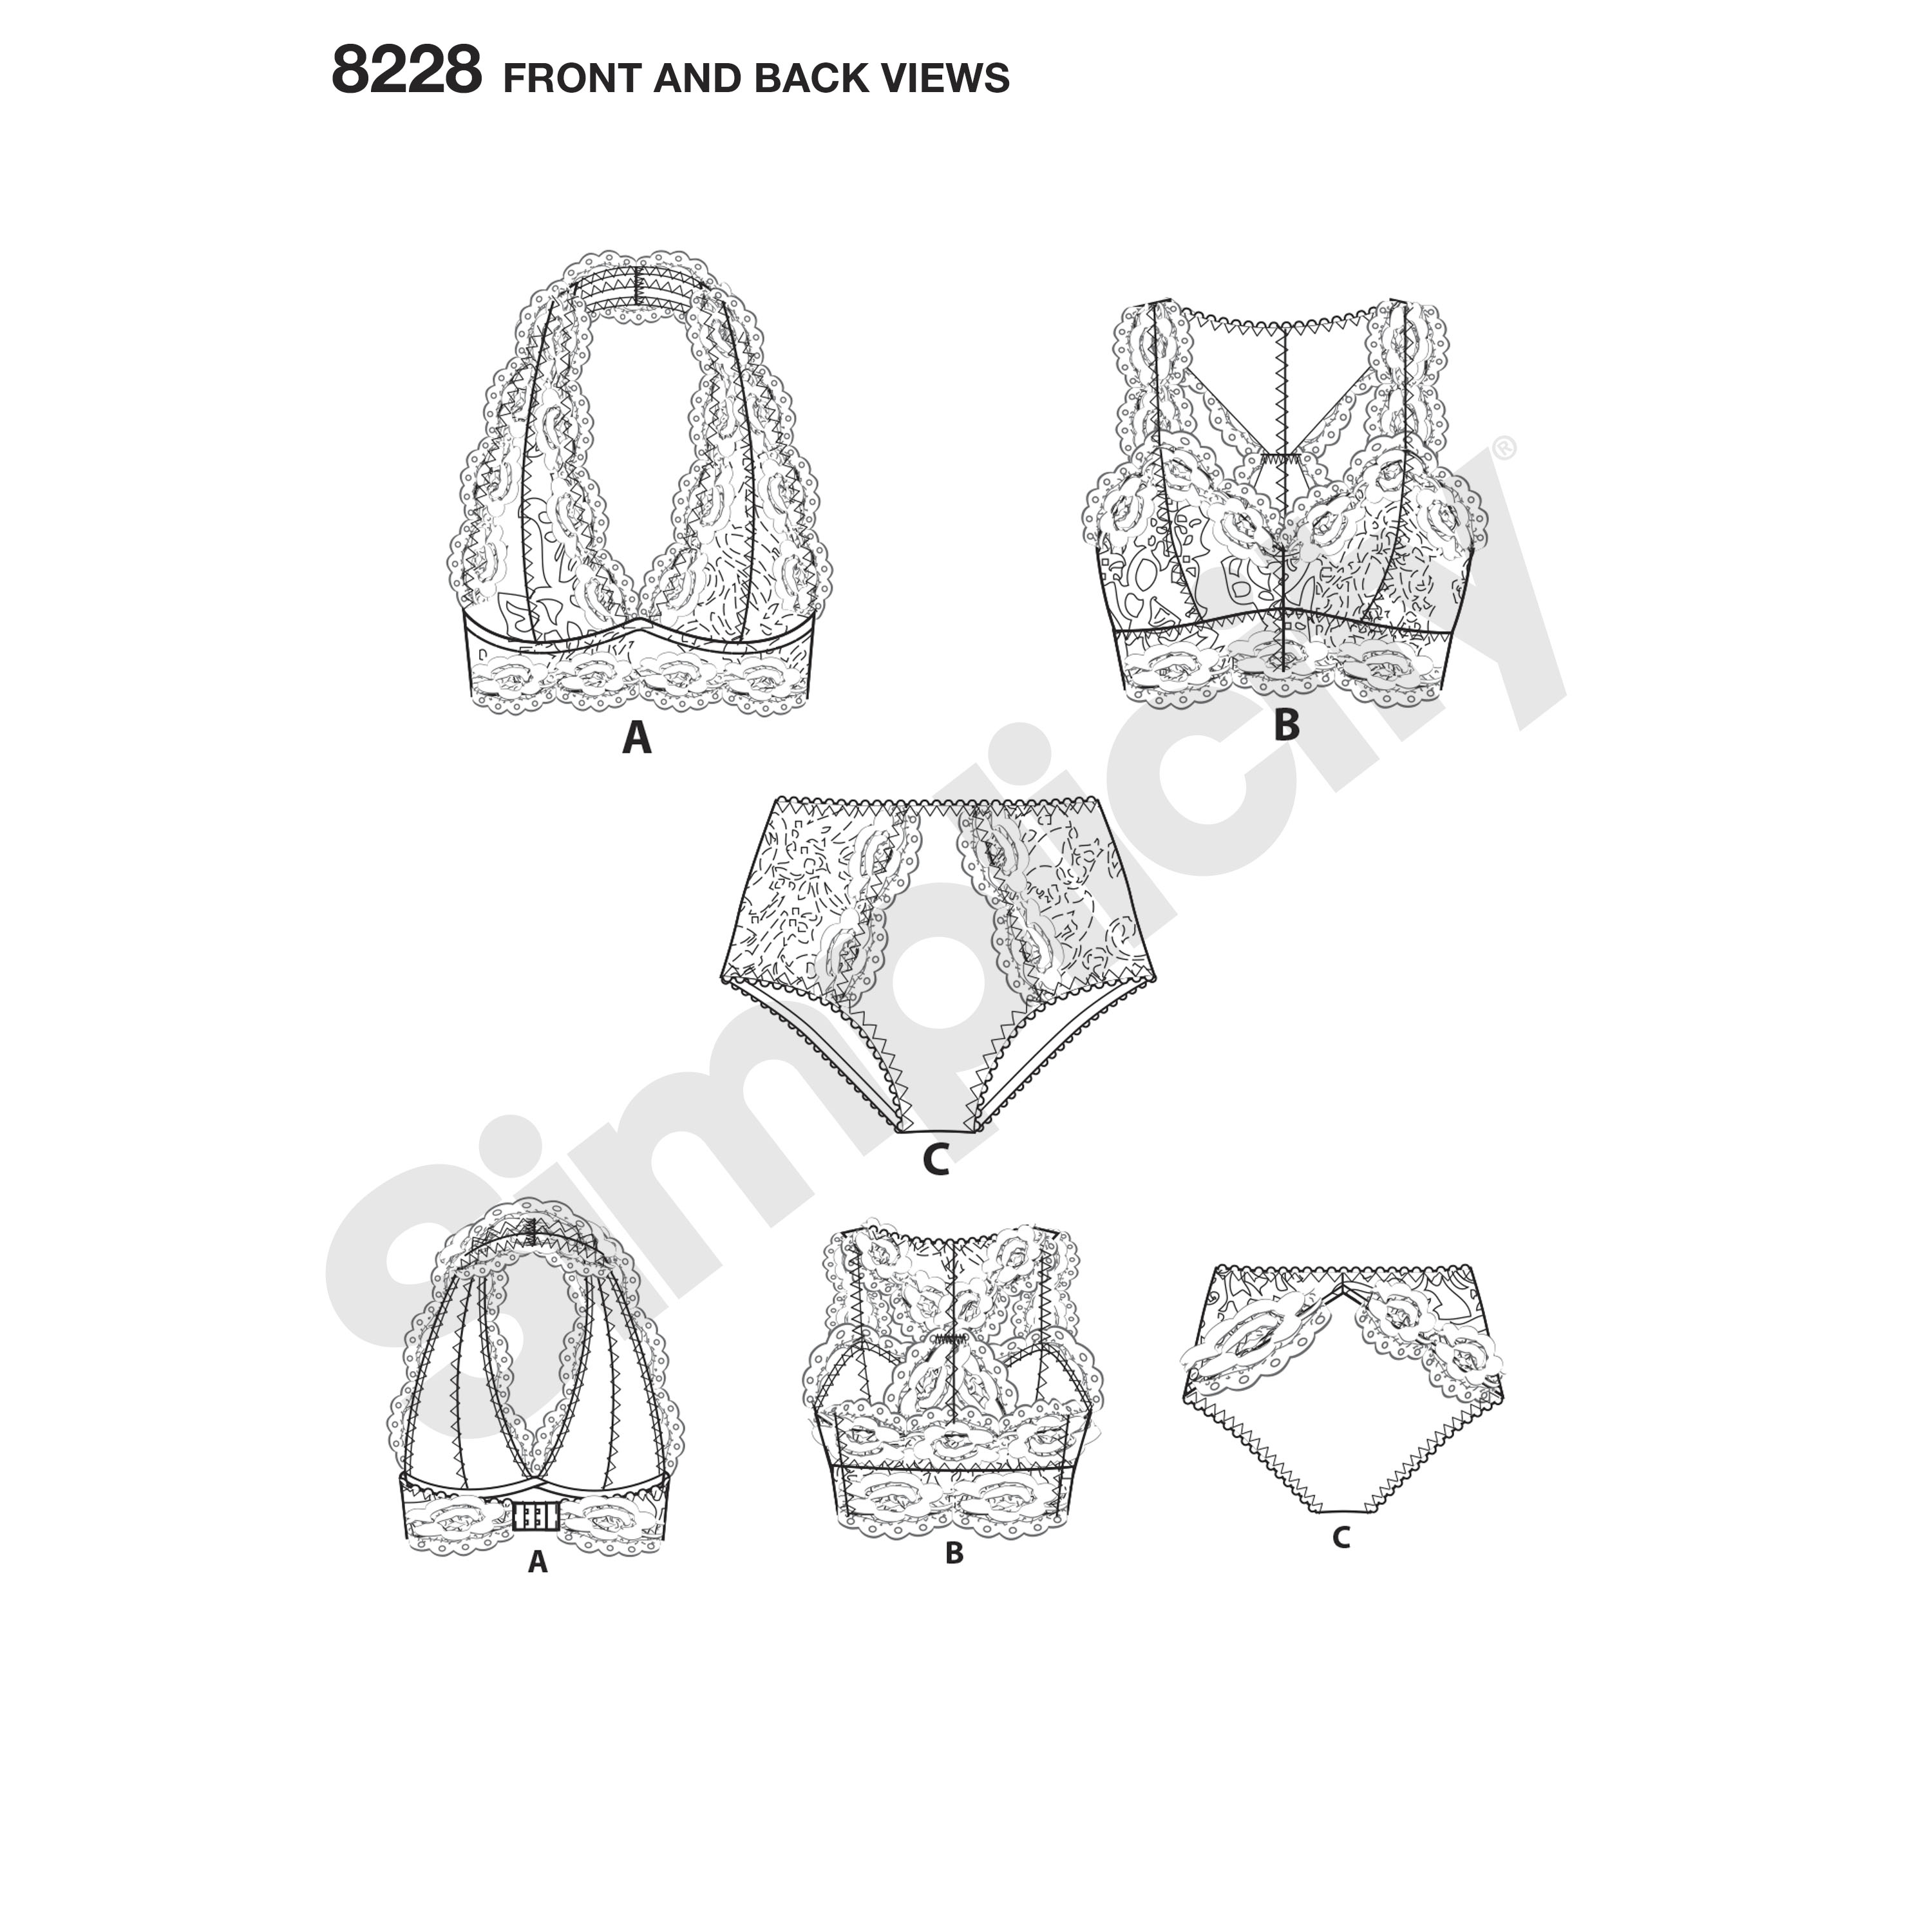 Misses Soft Cup Bras and Panties Simplicity Sewing Pattern 8228